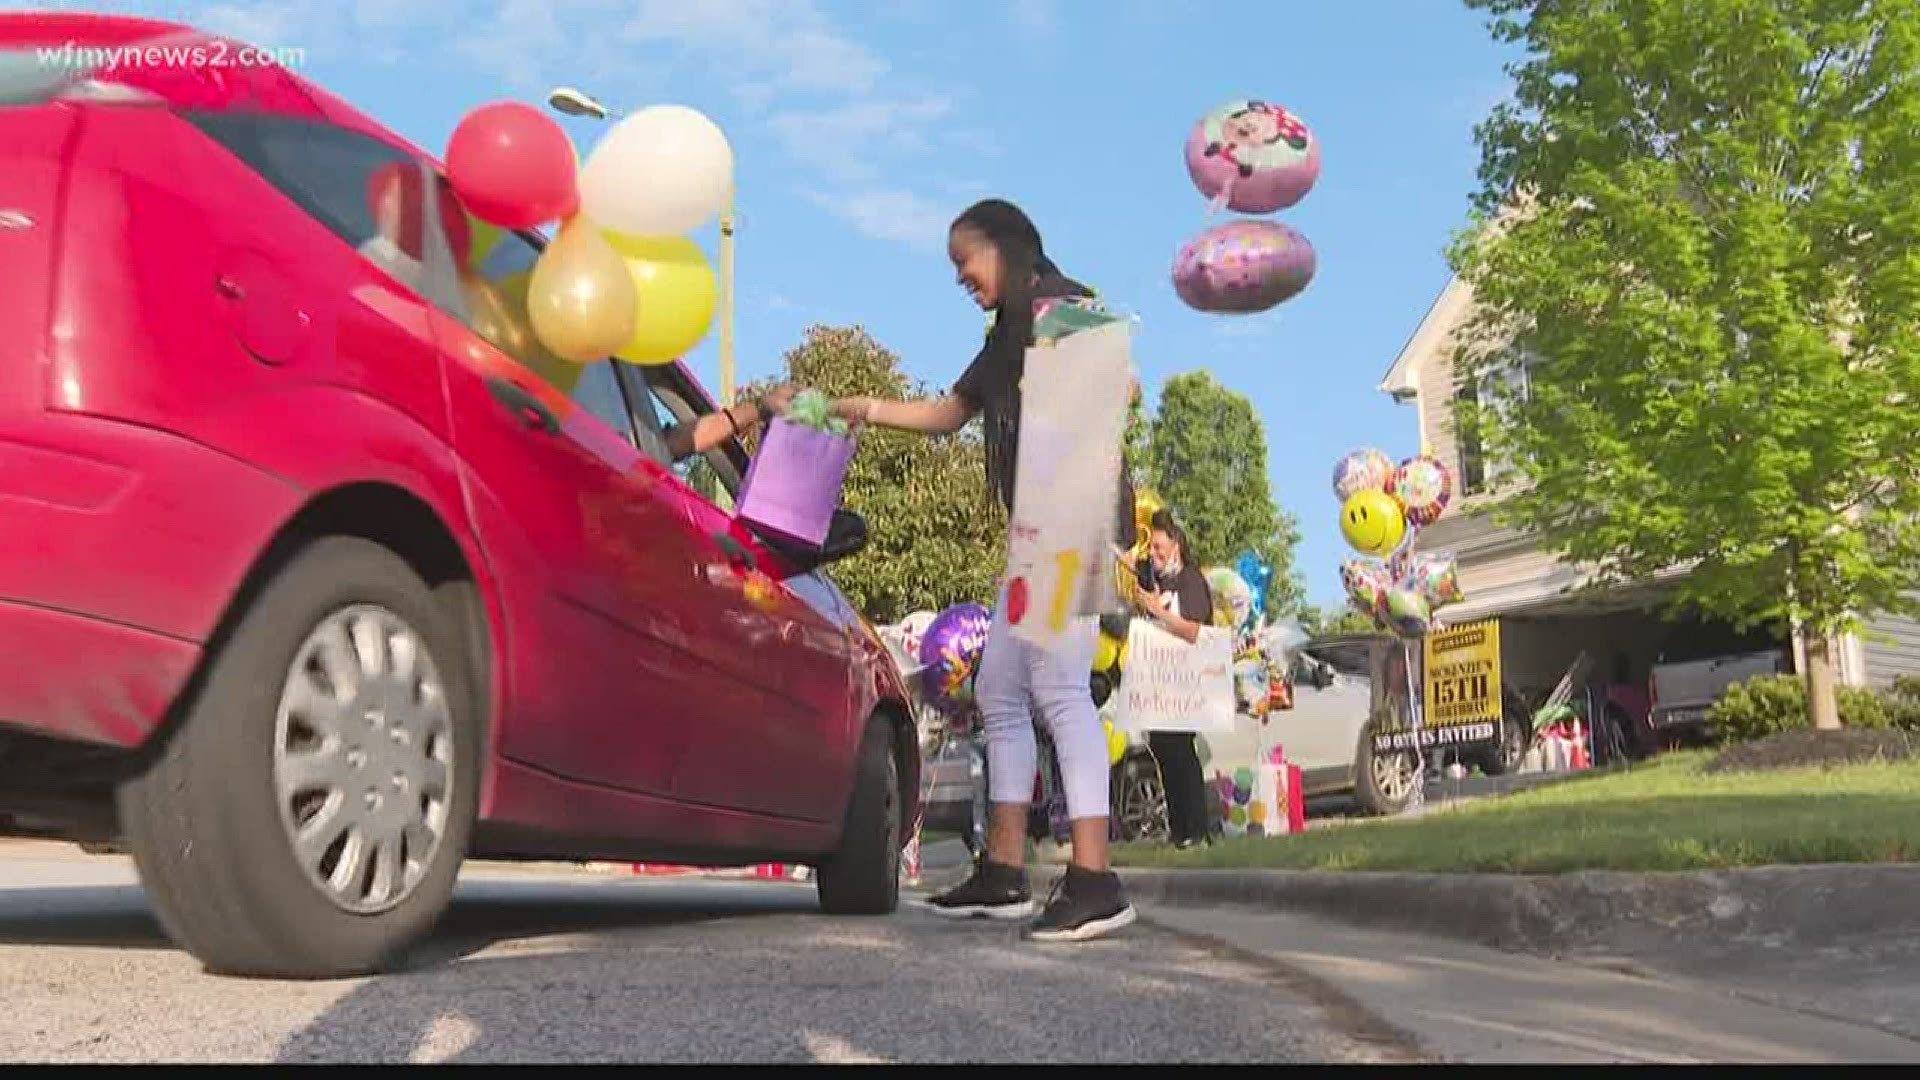 McKenzie Zolicoffer turned 15 on Tuesday. She had no idea friends, family and more would line up in their cars outside her house for the big day.